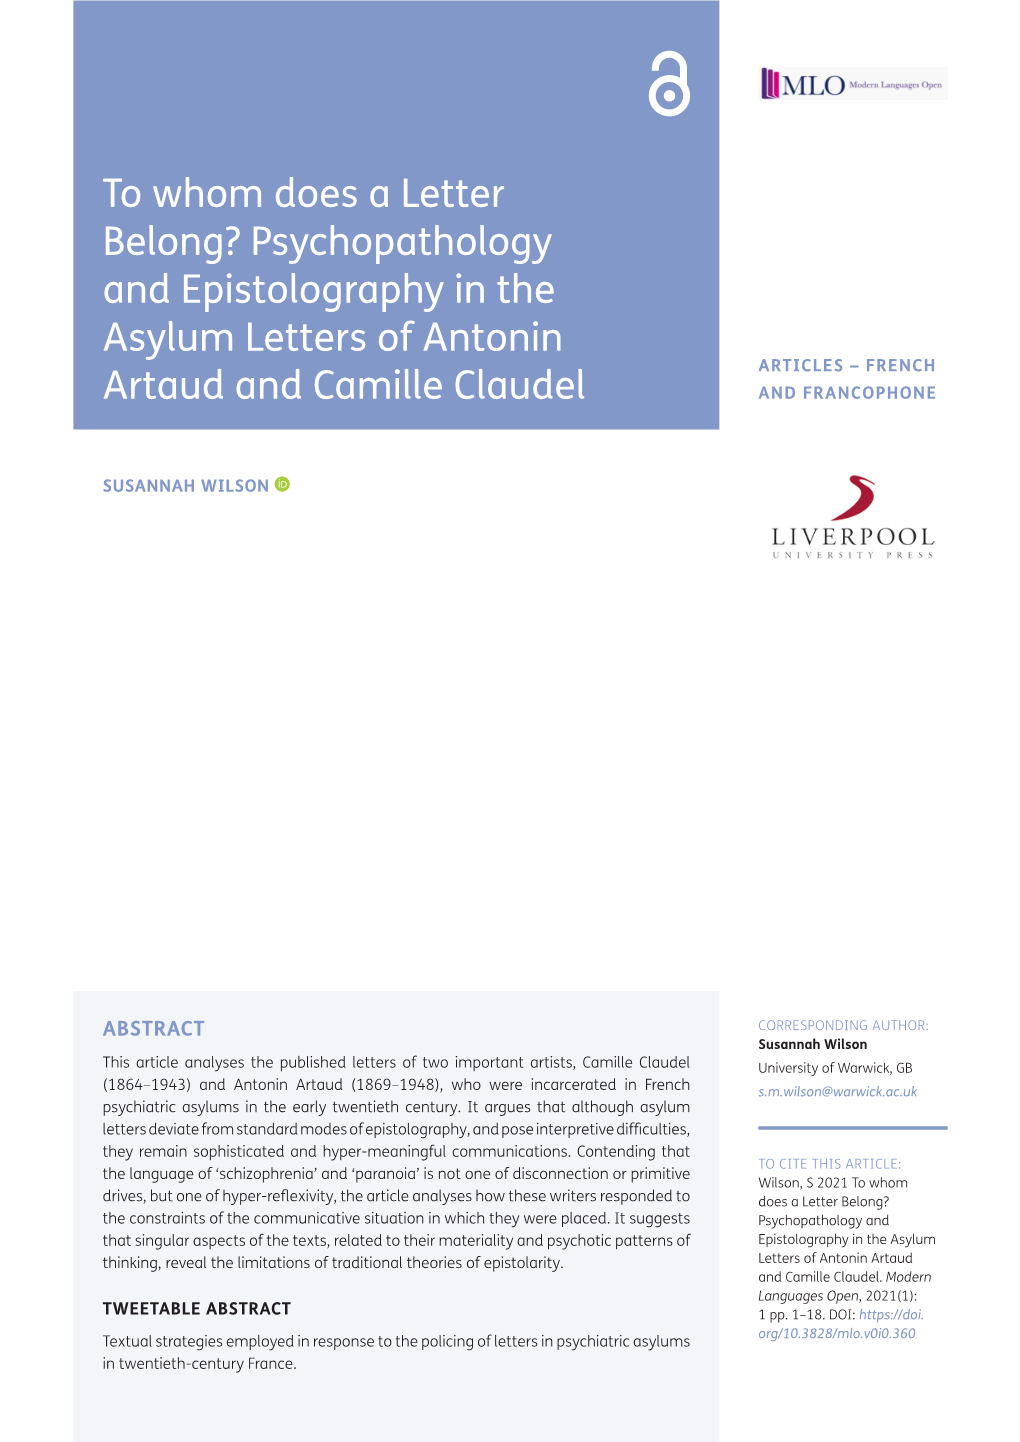 Psychopathology and Epistolography in the Asylum Letters of Antonin Artaud and Camille Claudel